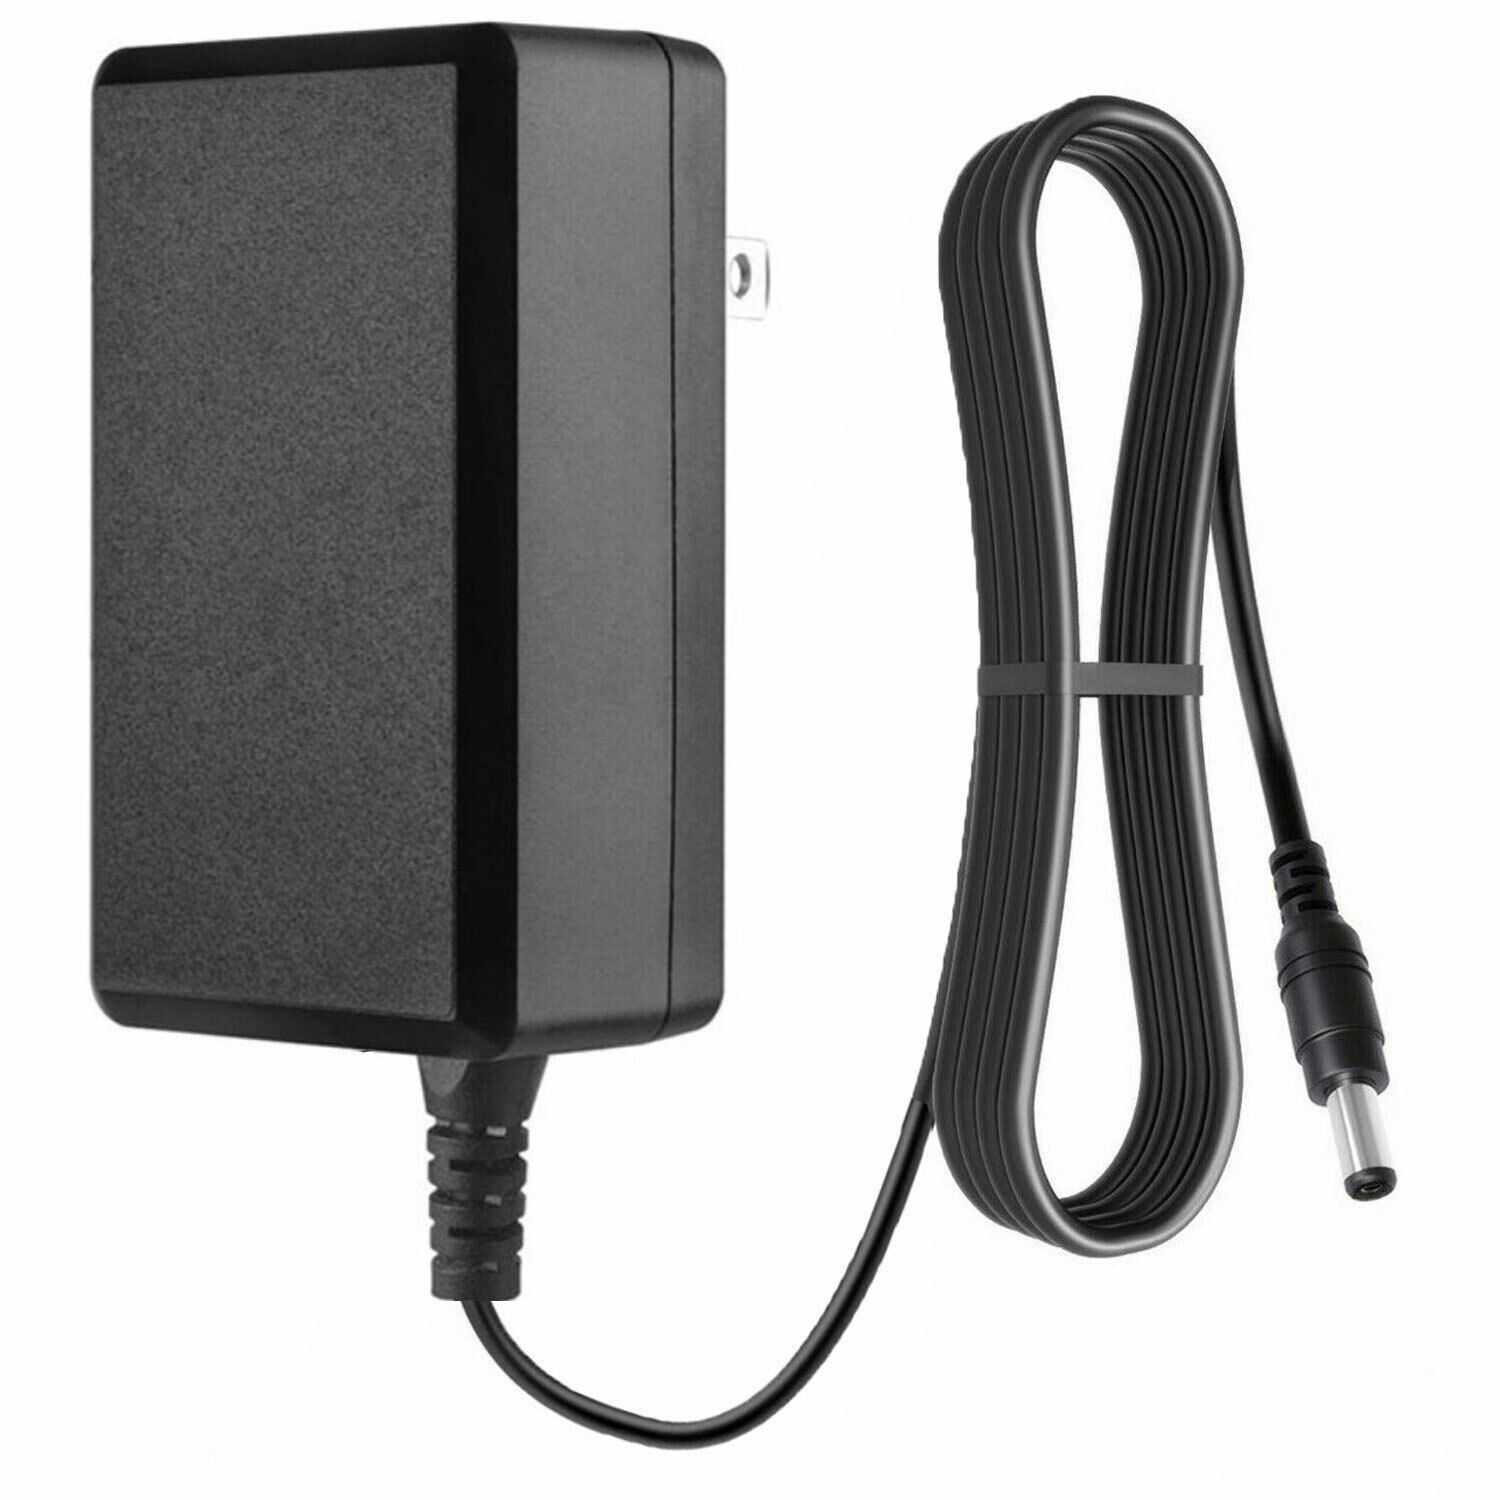 *Brand NEW*AC Adapter Charger for MXR M169 Carbon Copy Analog Delay Pedal Power Supply Cord